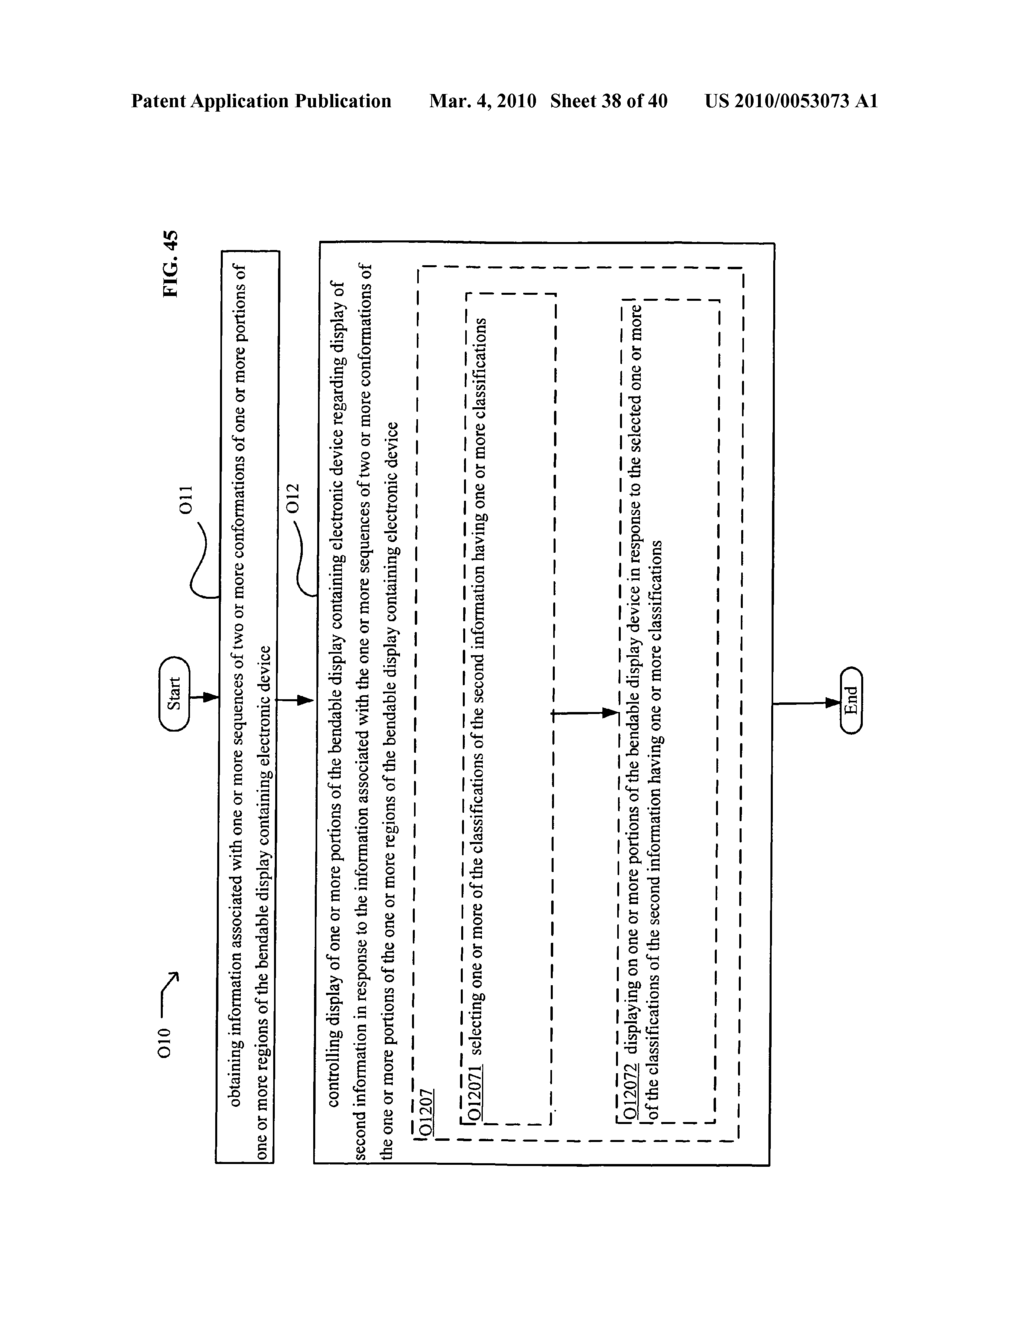 Display control based on bendable display containing electronic device conformation sequence status - diagram, schematic, and image 40